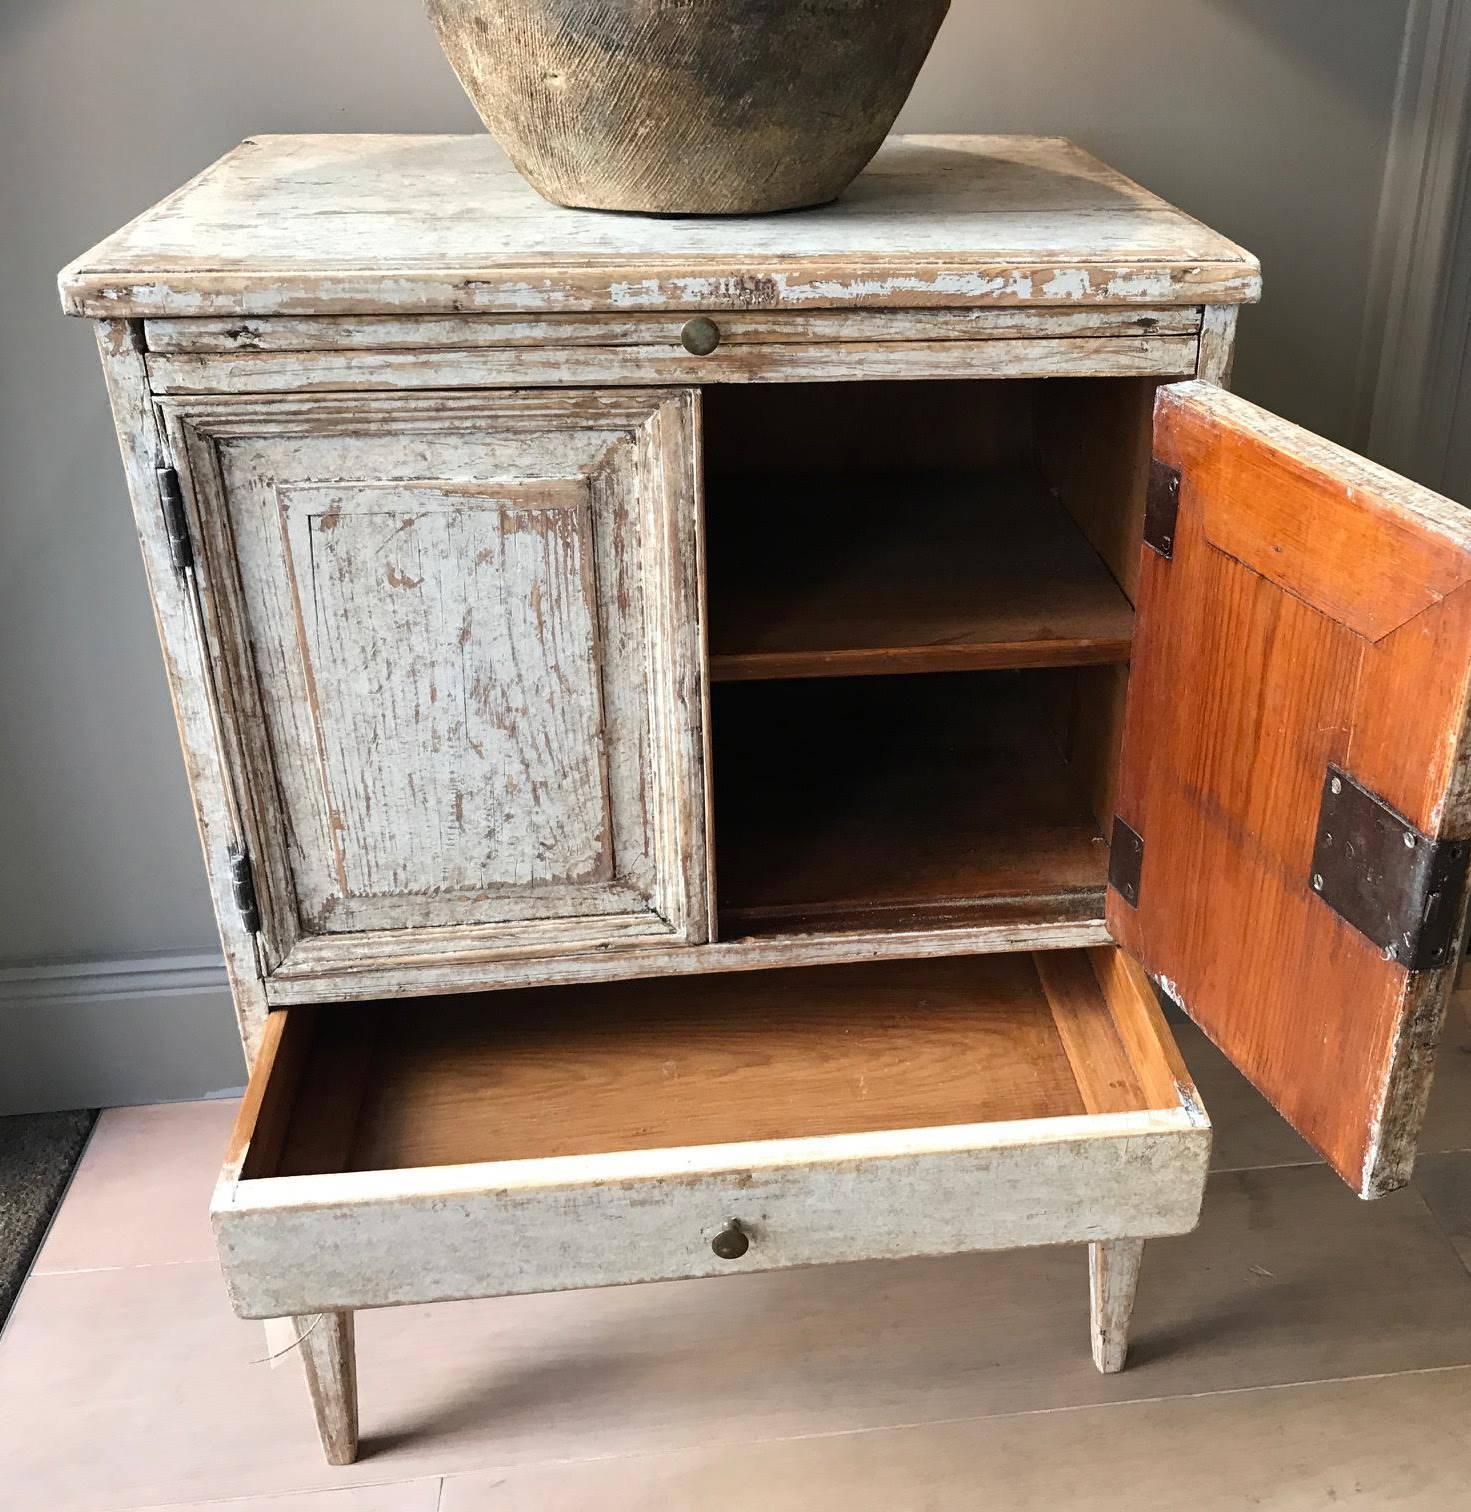 Pine 18th Century Swedish Gustavian Period Petite Bedside Table or Nightstand